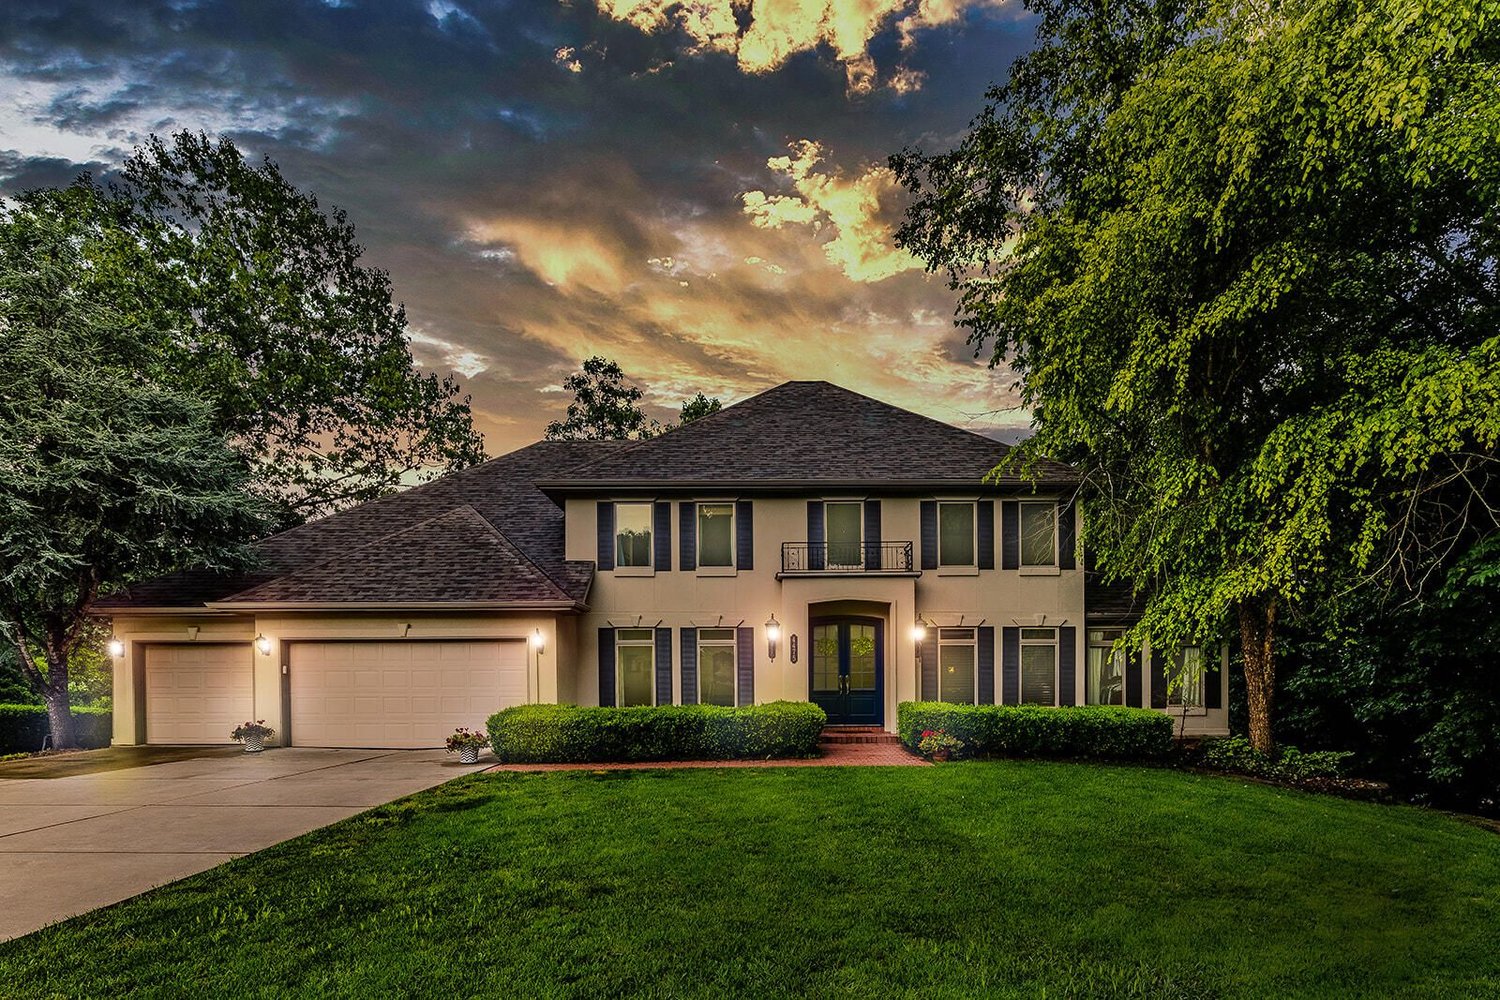 4475 E. Cross Timbers St.
$750,000
Bedrooms: 6
Bathrooms: 7
Listing firm: Cantrell Real Estate